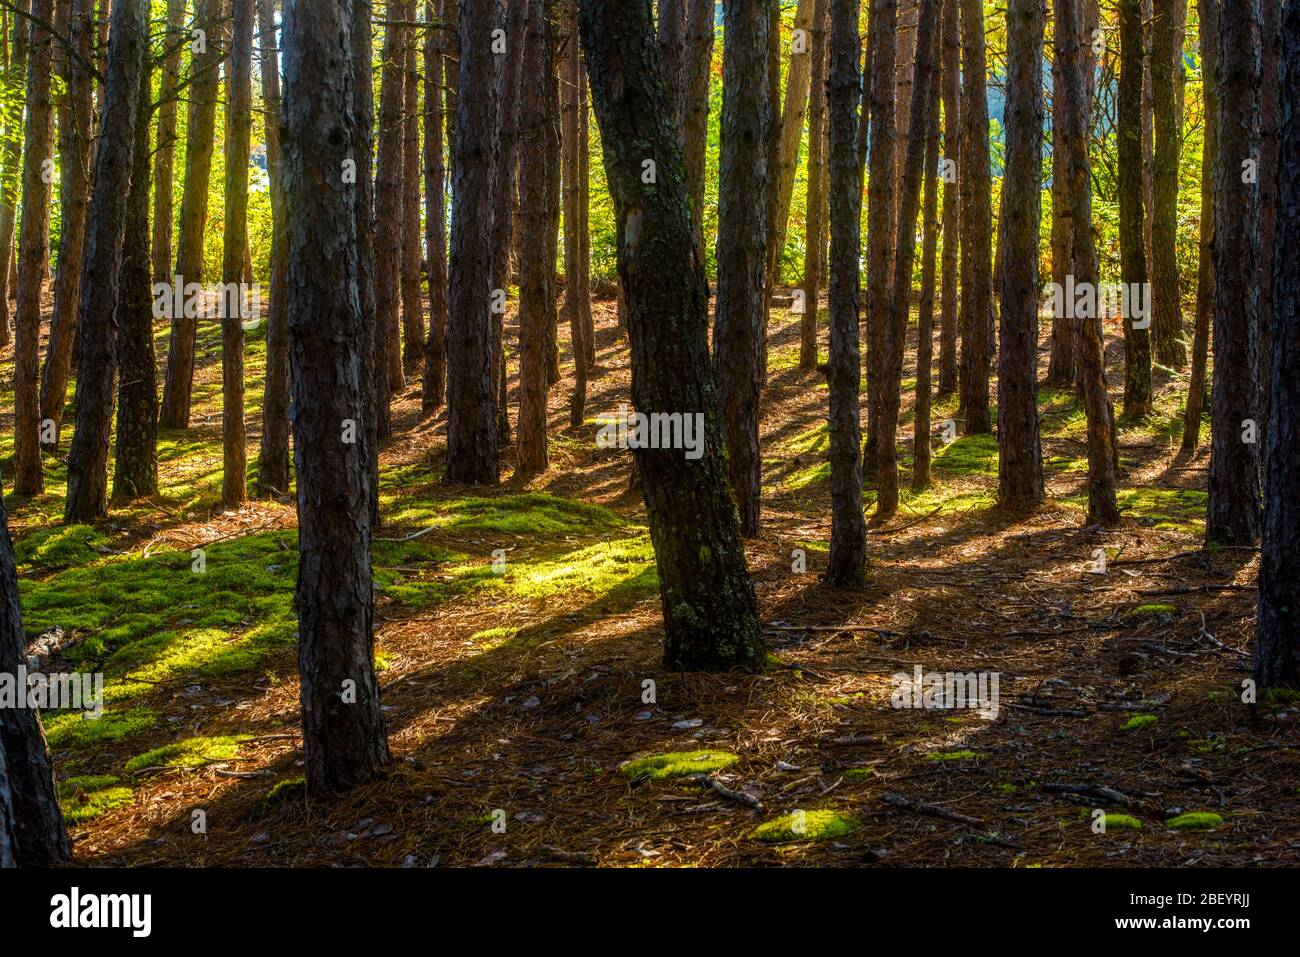 Pine tree trunks in late summer, Algonquin Provincial Park, Nipissing Township, Ontario, Canada Stock Photo